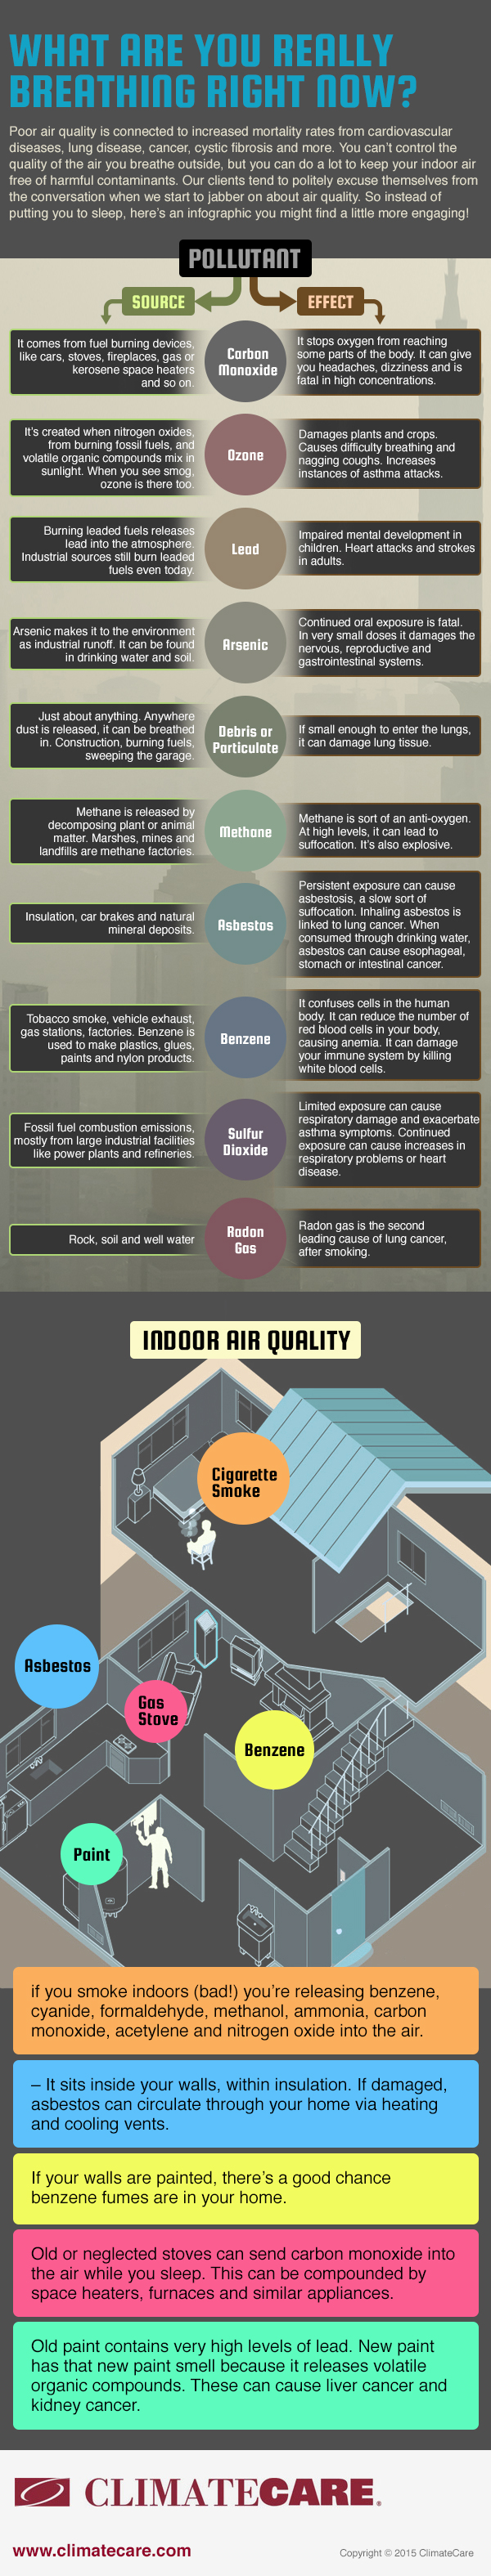 Banish Indoor Air Pollution with ClimateCare